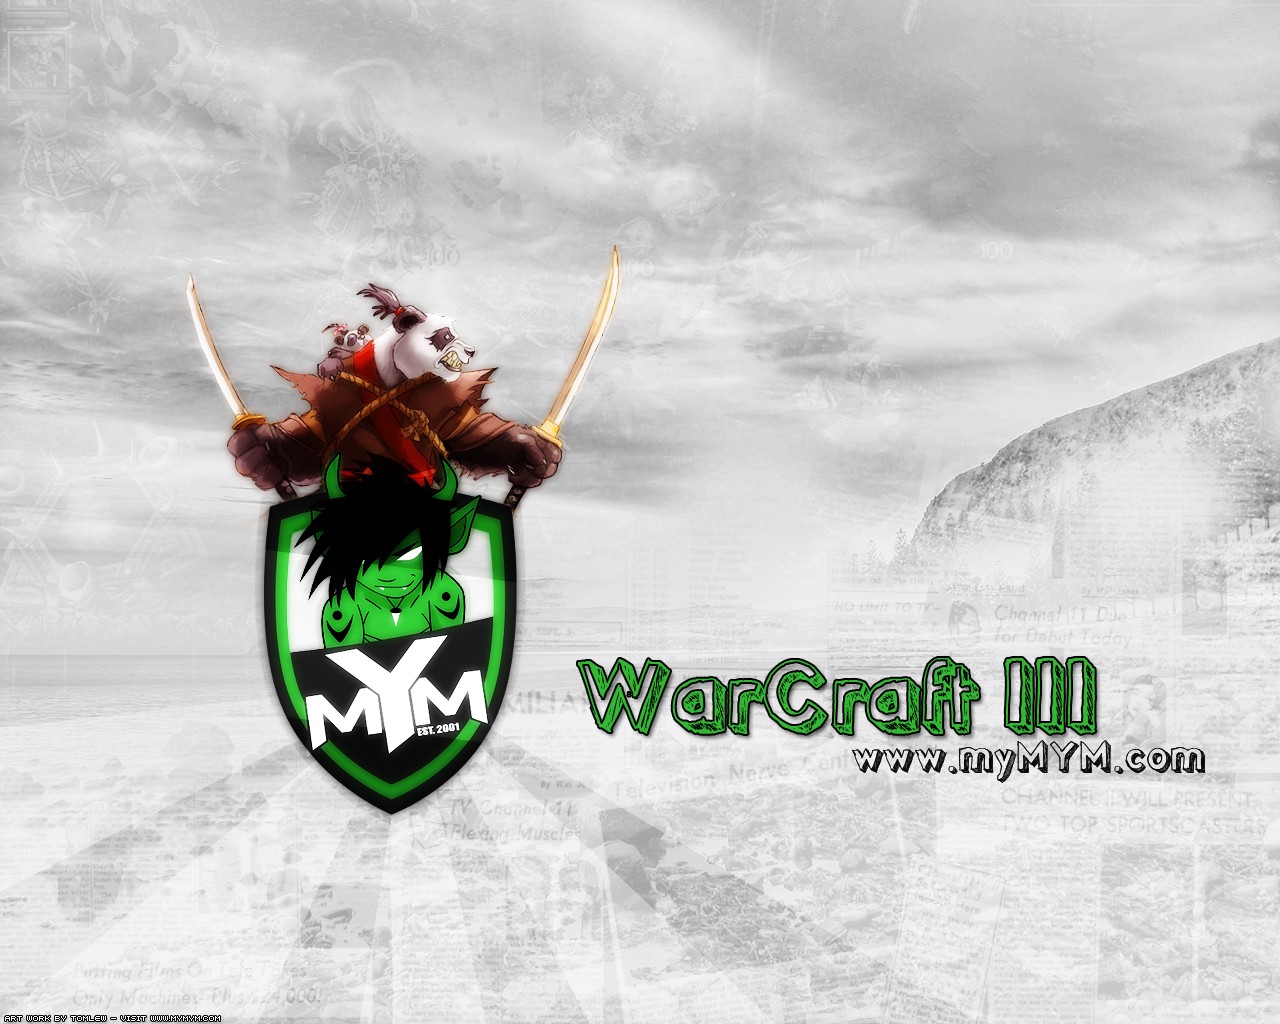 Meet Your Makers Warcraft Iii PC Gaming 1280x1024